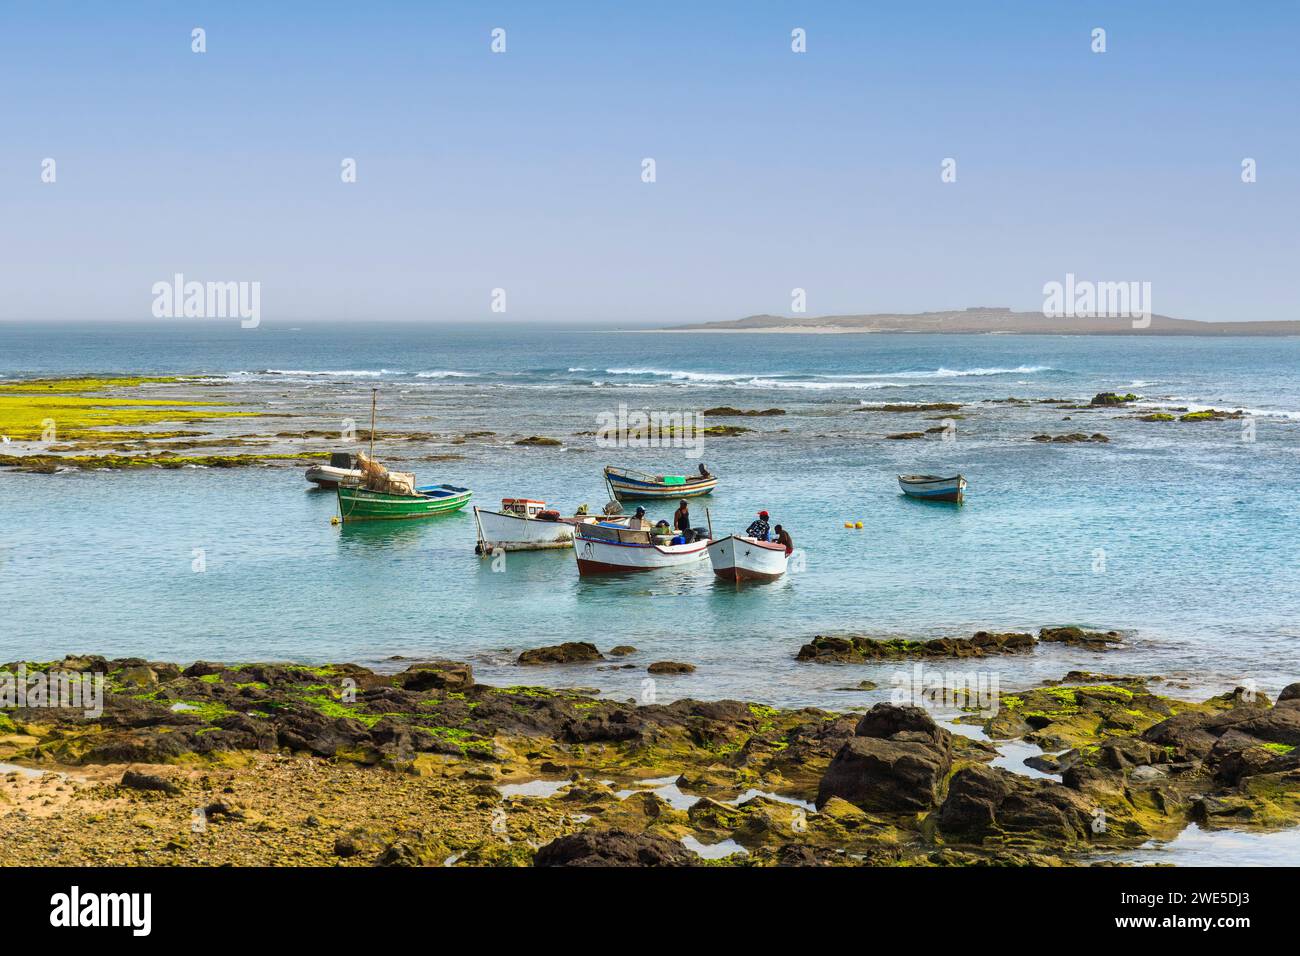 Boa Vista, Cape Verde- March 22, 2018: A peaceful harbor scene with colorful boats in Sal Rei serene waters Stock Photo